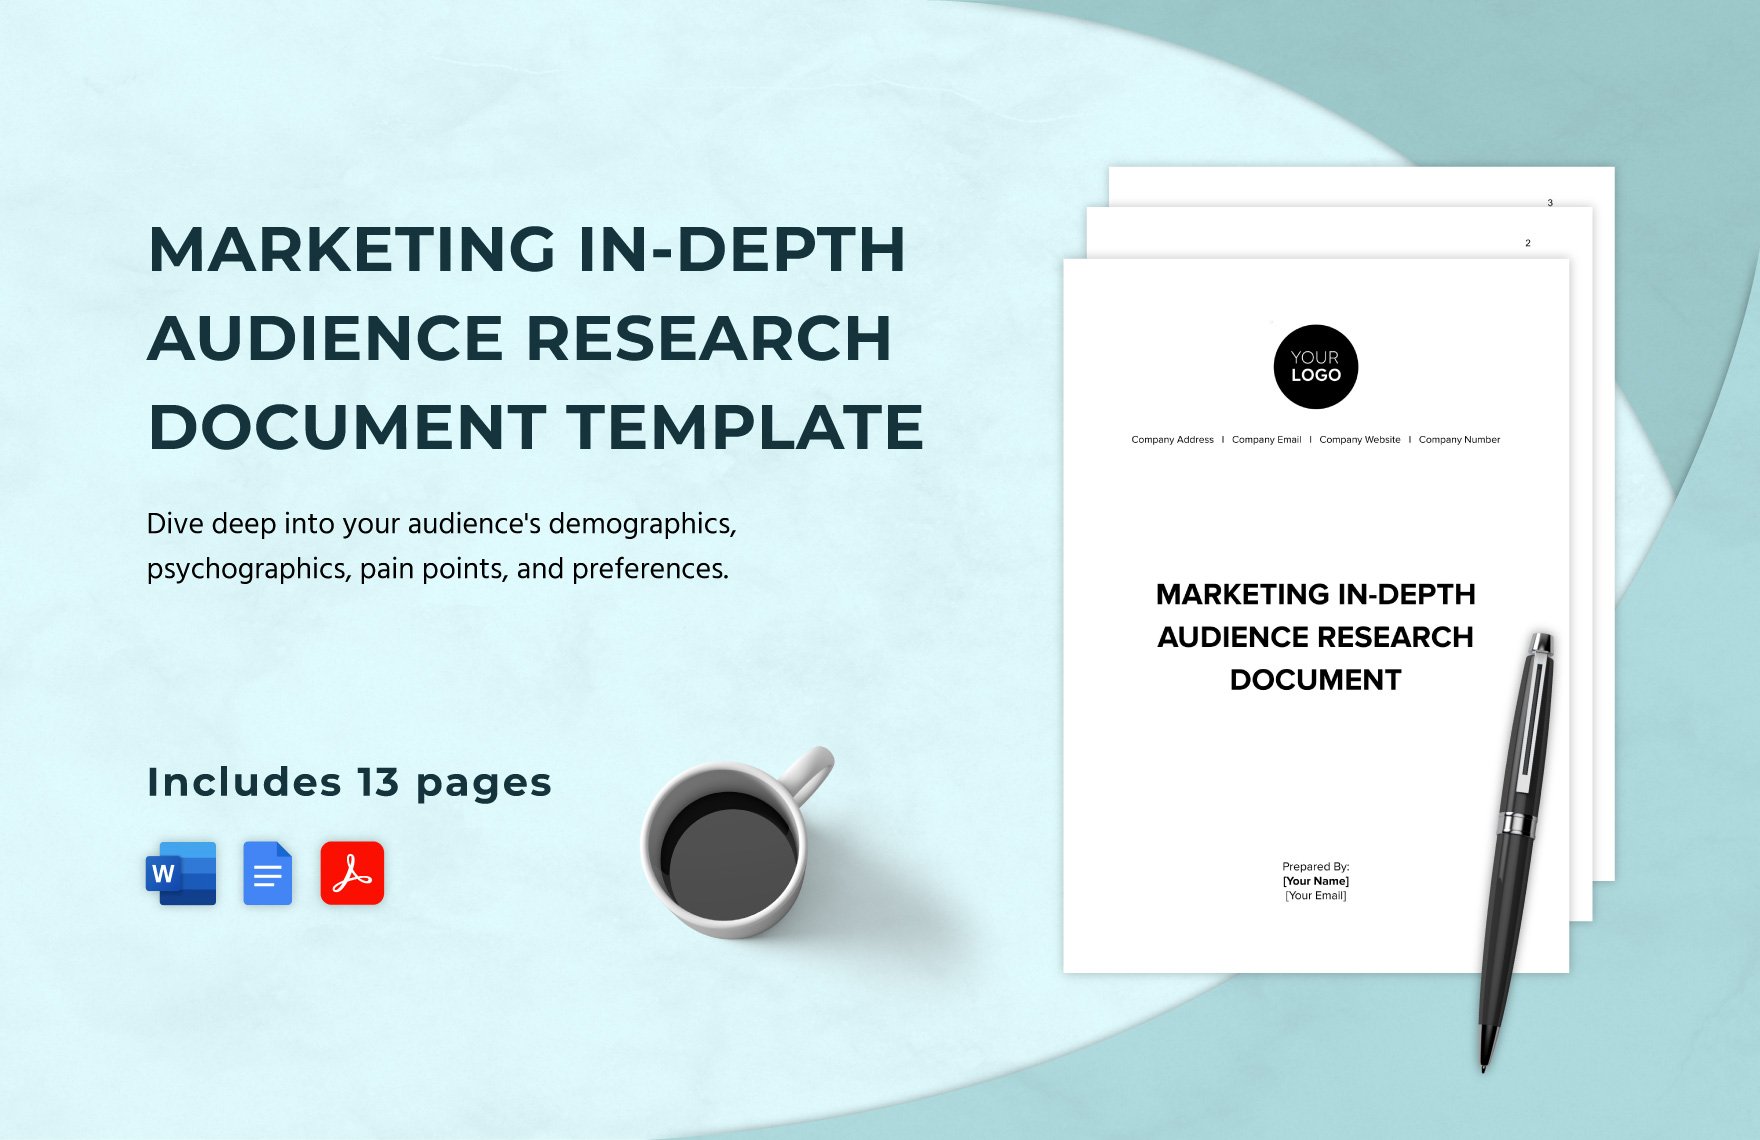 Marketing In-depth Audience Research Document Template